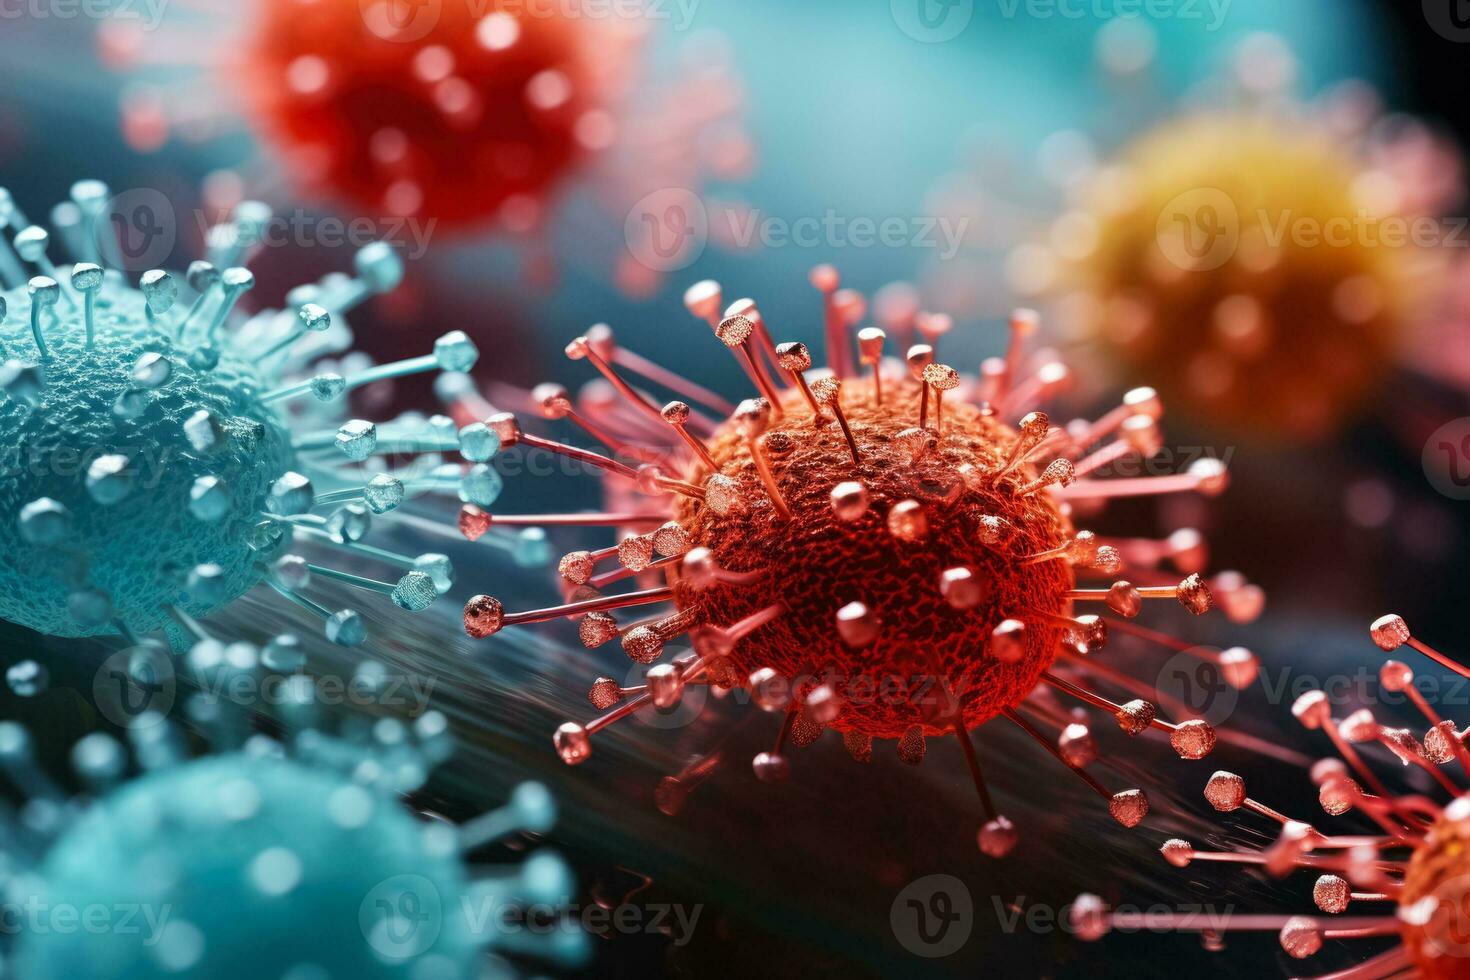 Pinpoint perceptions Highly detailed macro images of harmful viruses in clinical lab photo